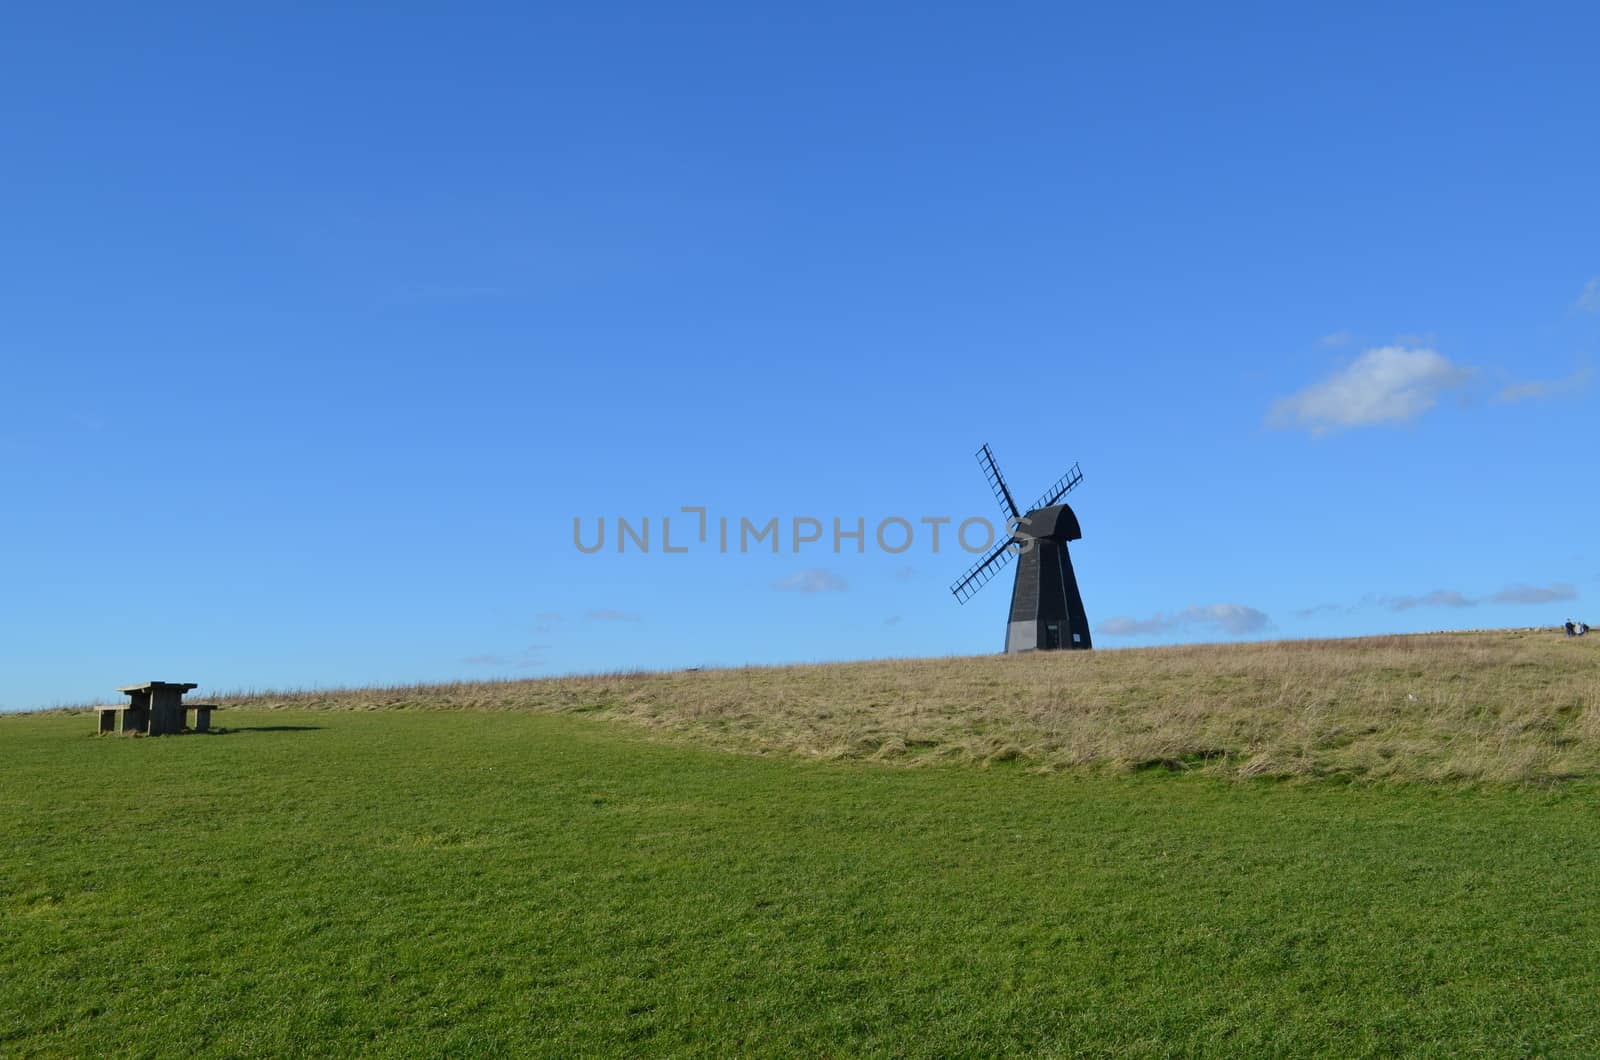 Rottingdean Smock Windmill by bunsview